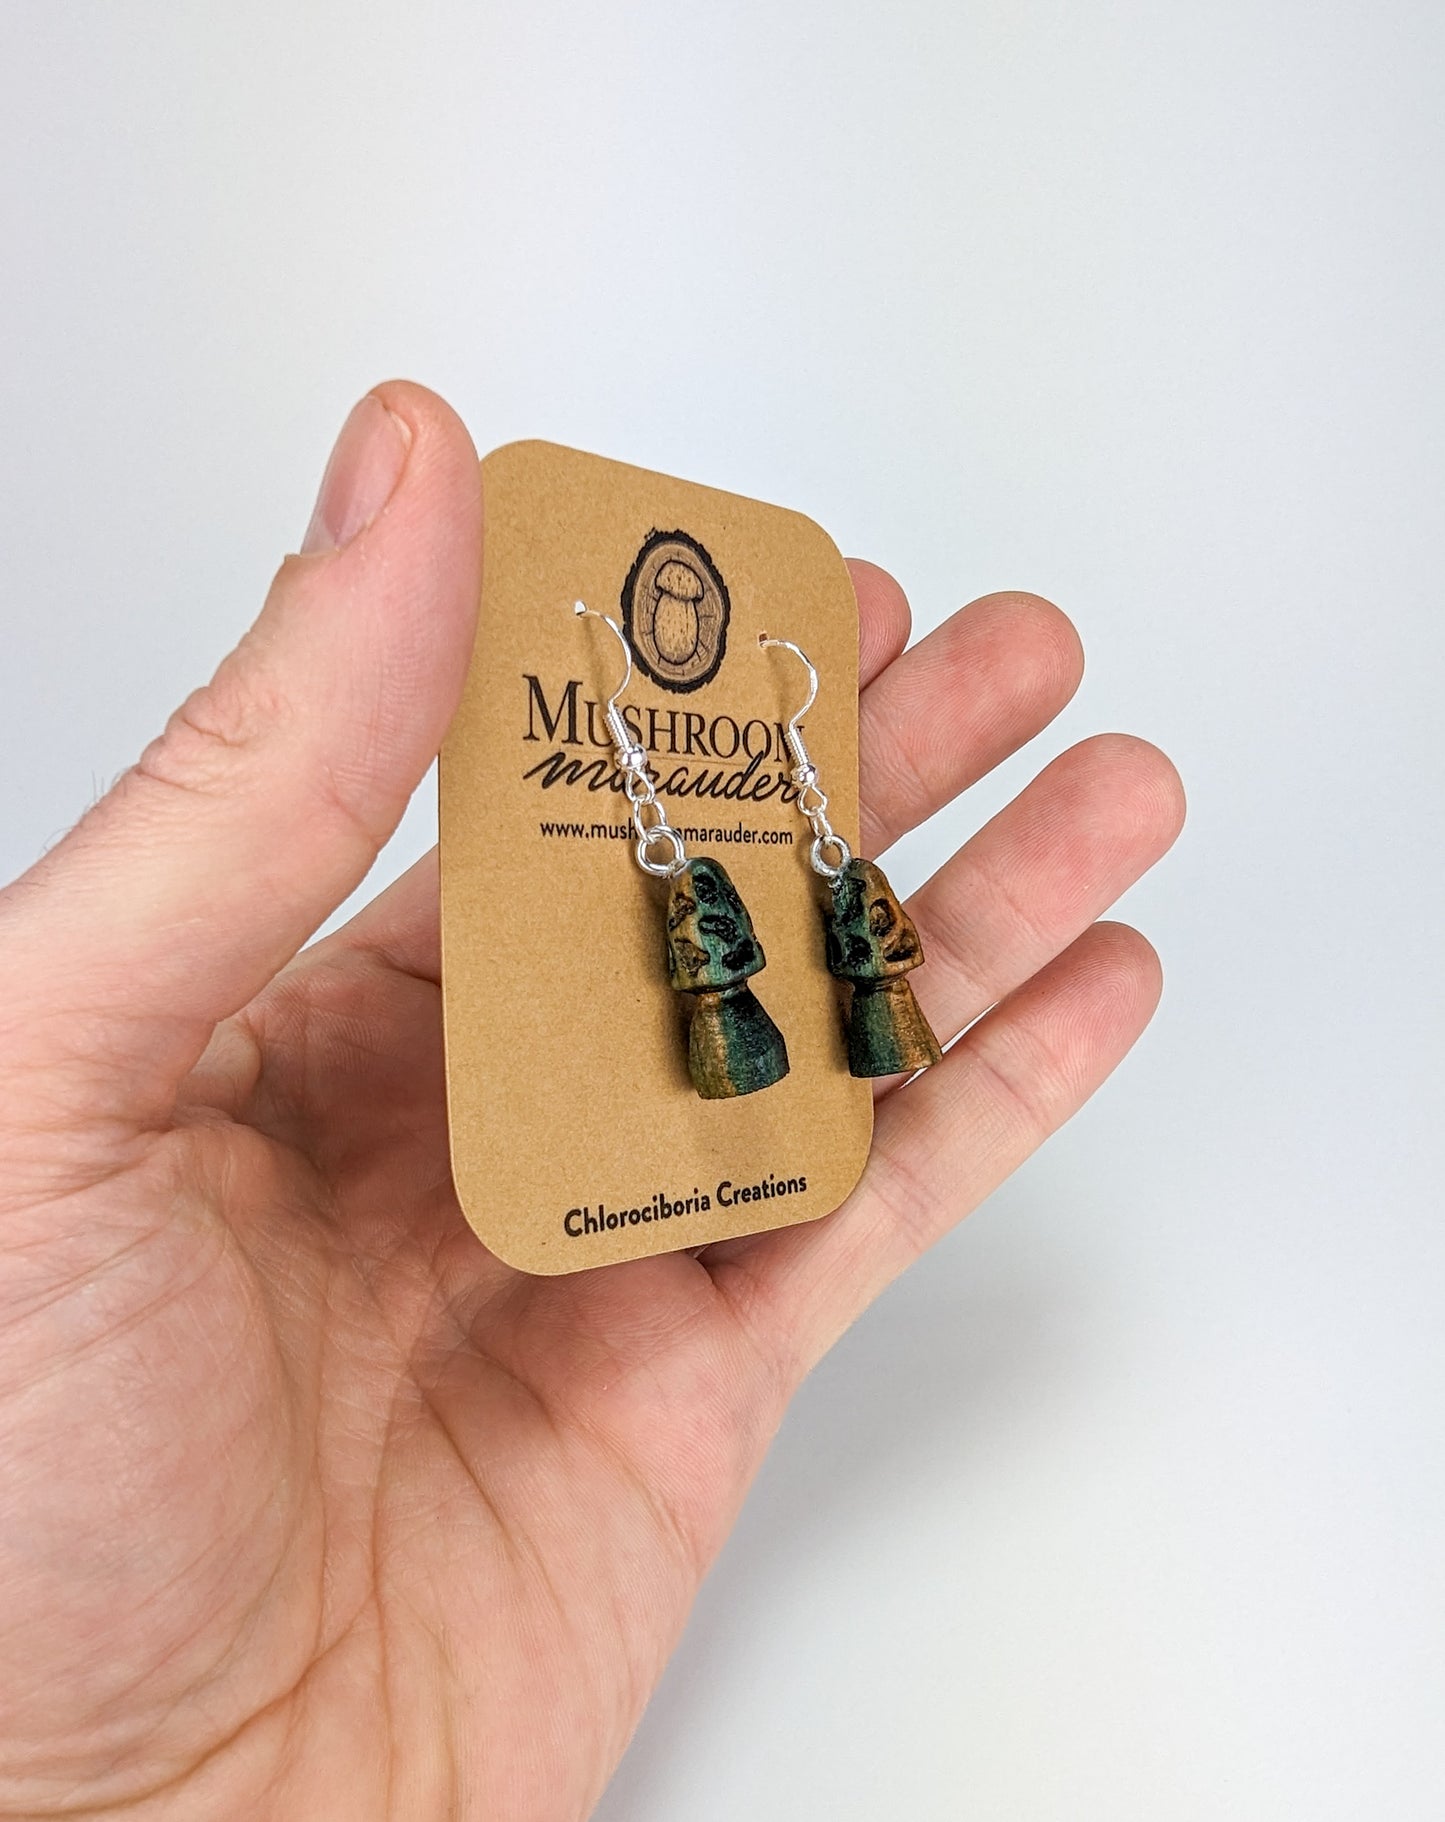 Morel Mushroom Earrings #2 | Carved From Naturally Green, Fungus-Stained Wood